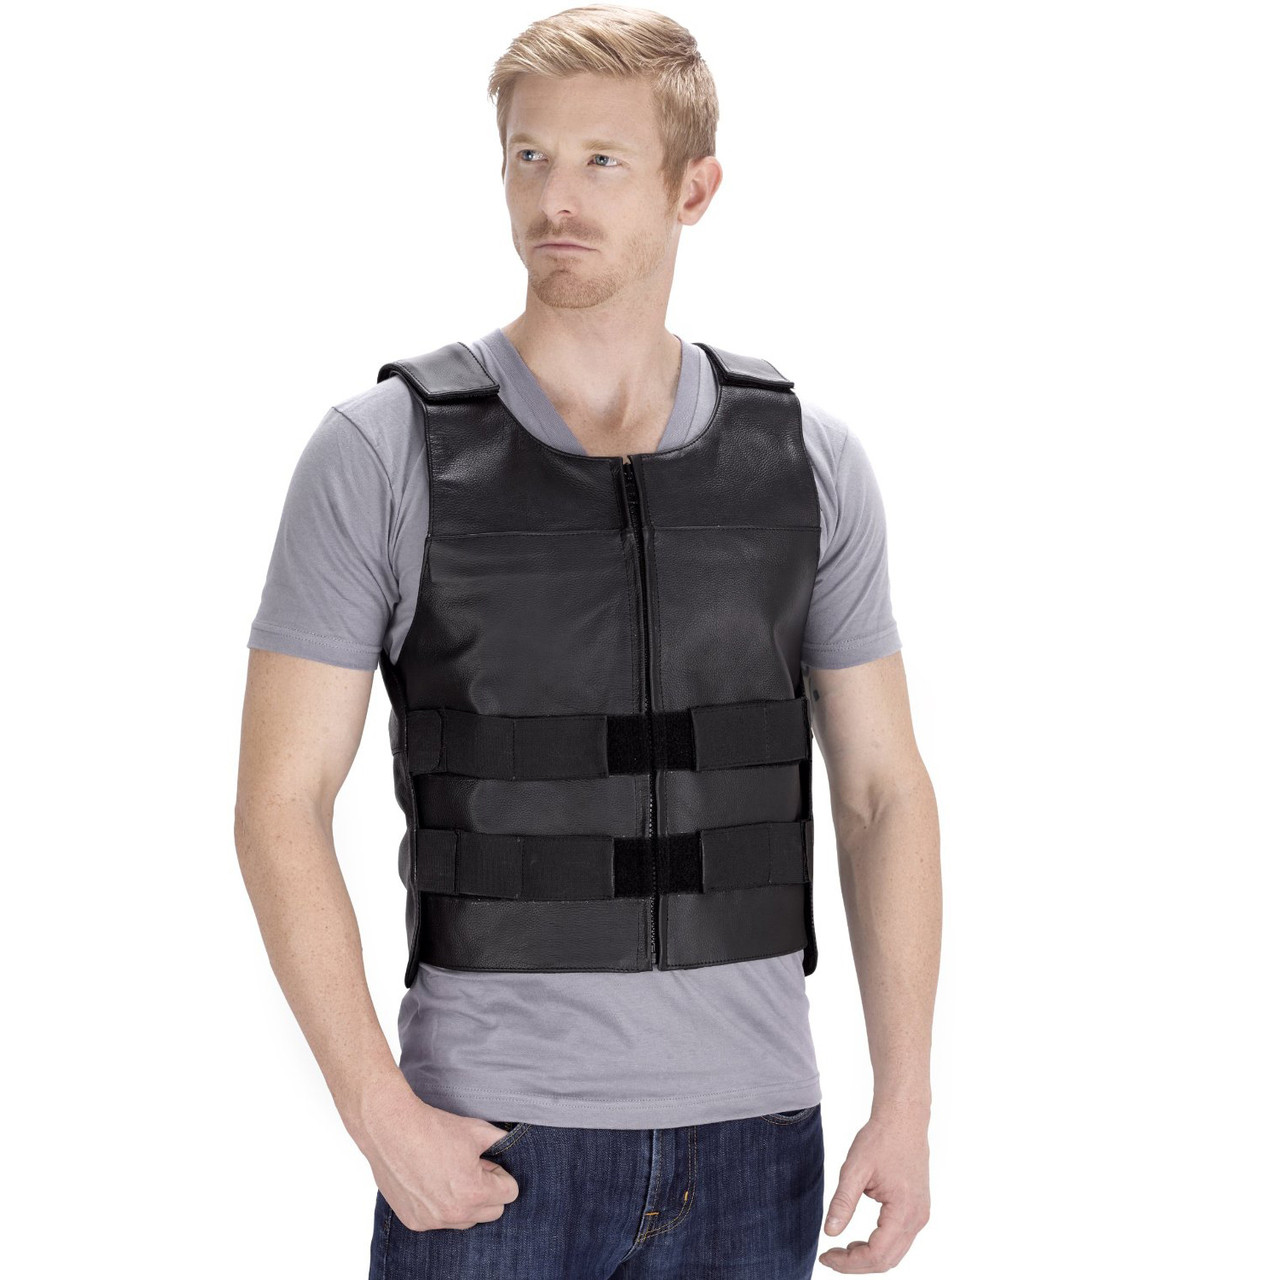 VikingCycle Bullet Proof Style Motorcycle Vest for Men - Motorcycle ...